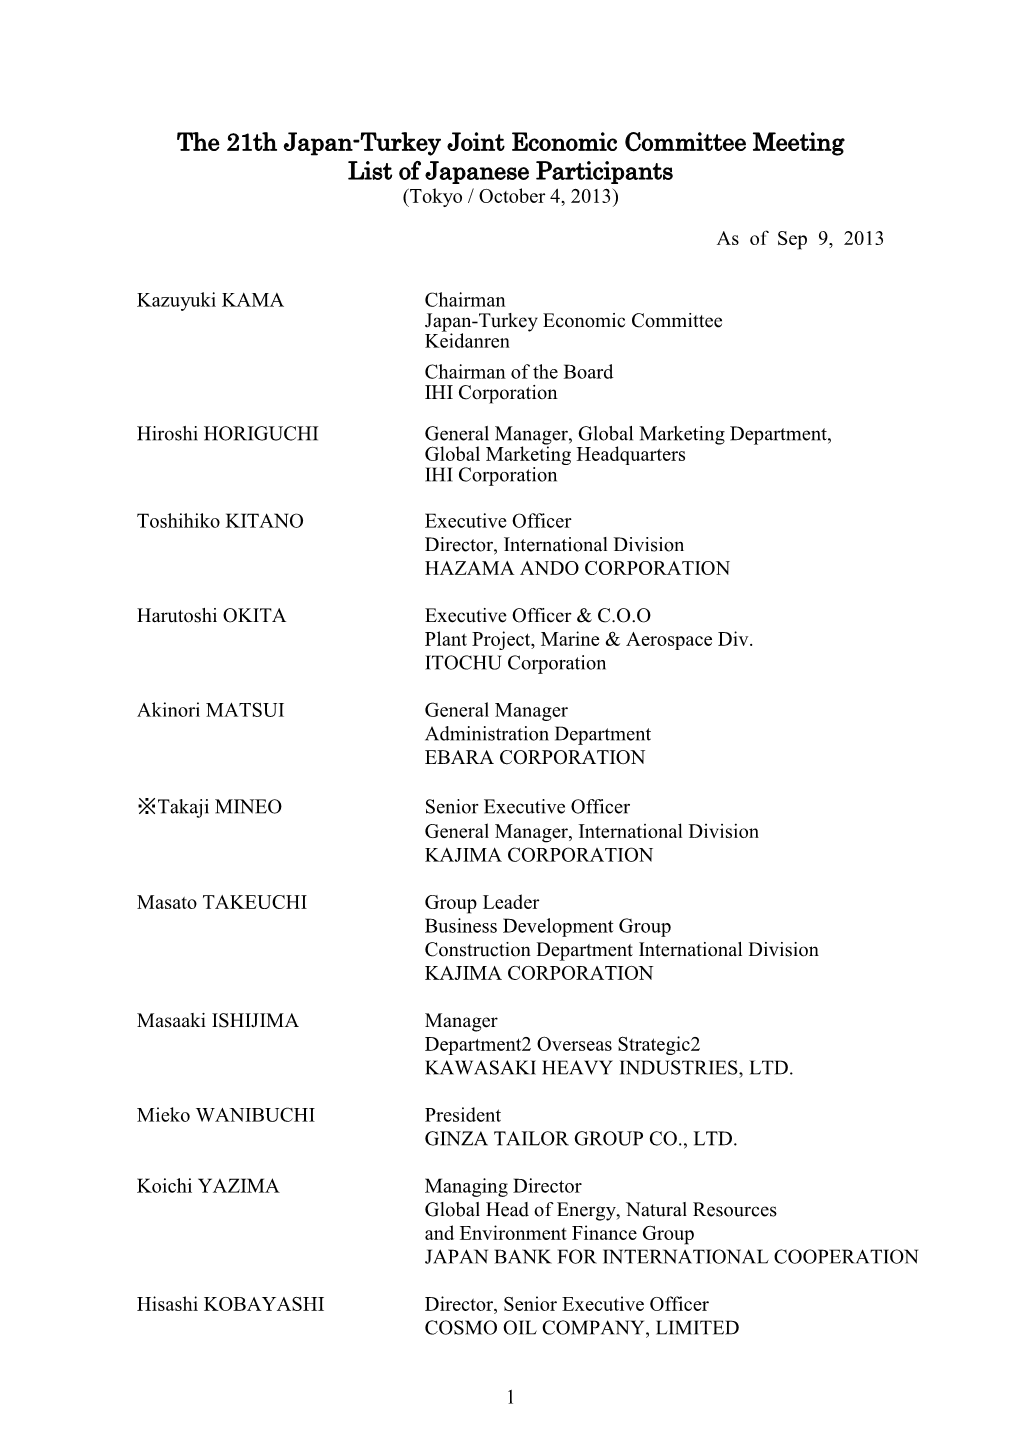 The 21Th Japan-Turkey Joint Economic Committee Meeting List of Japanese Participants (Tokyo / October 4, 2013)